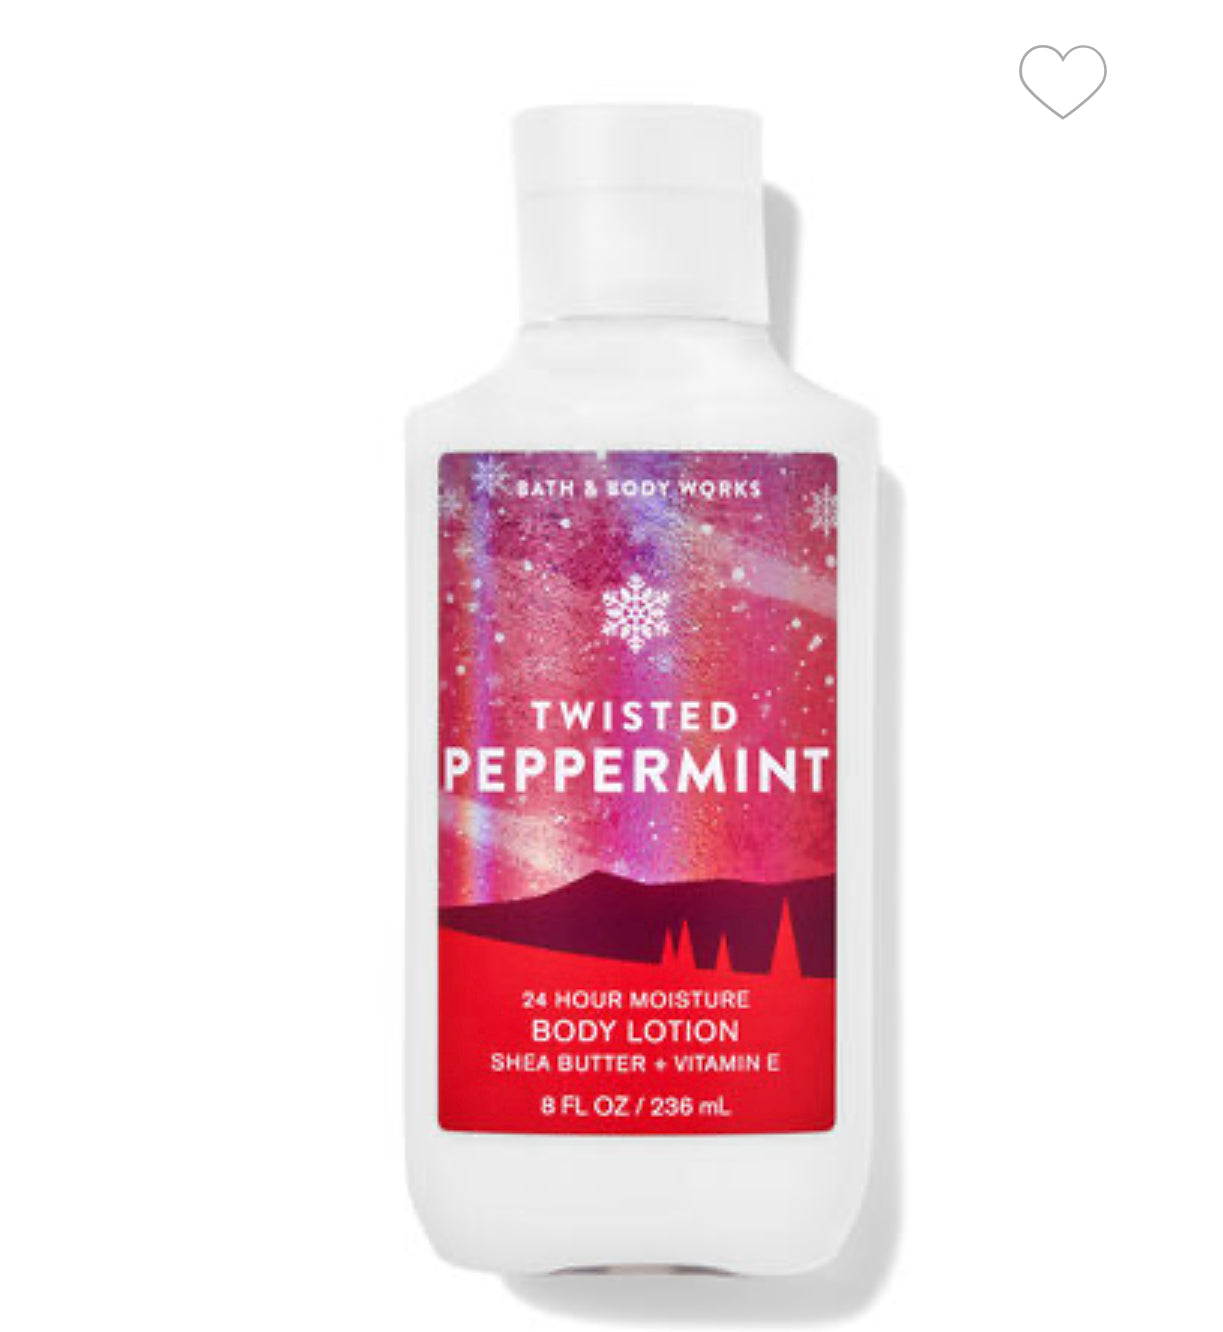 Crema Twisted Peppermint